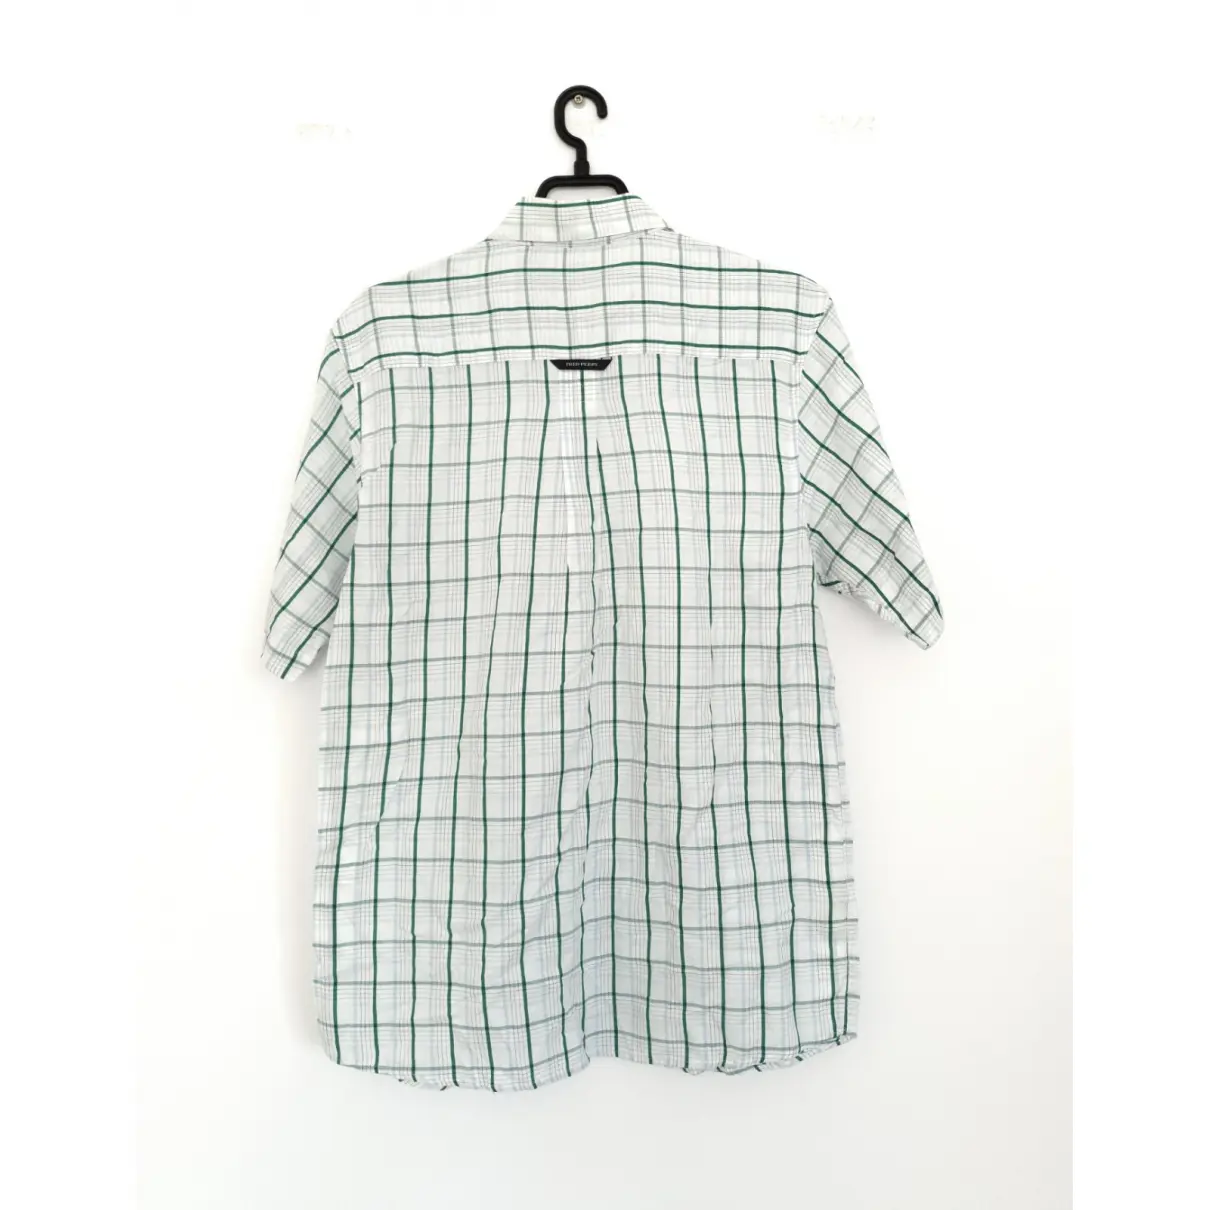 Buy Fred Perry Shirt online